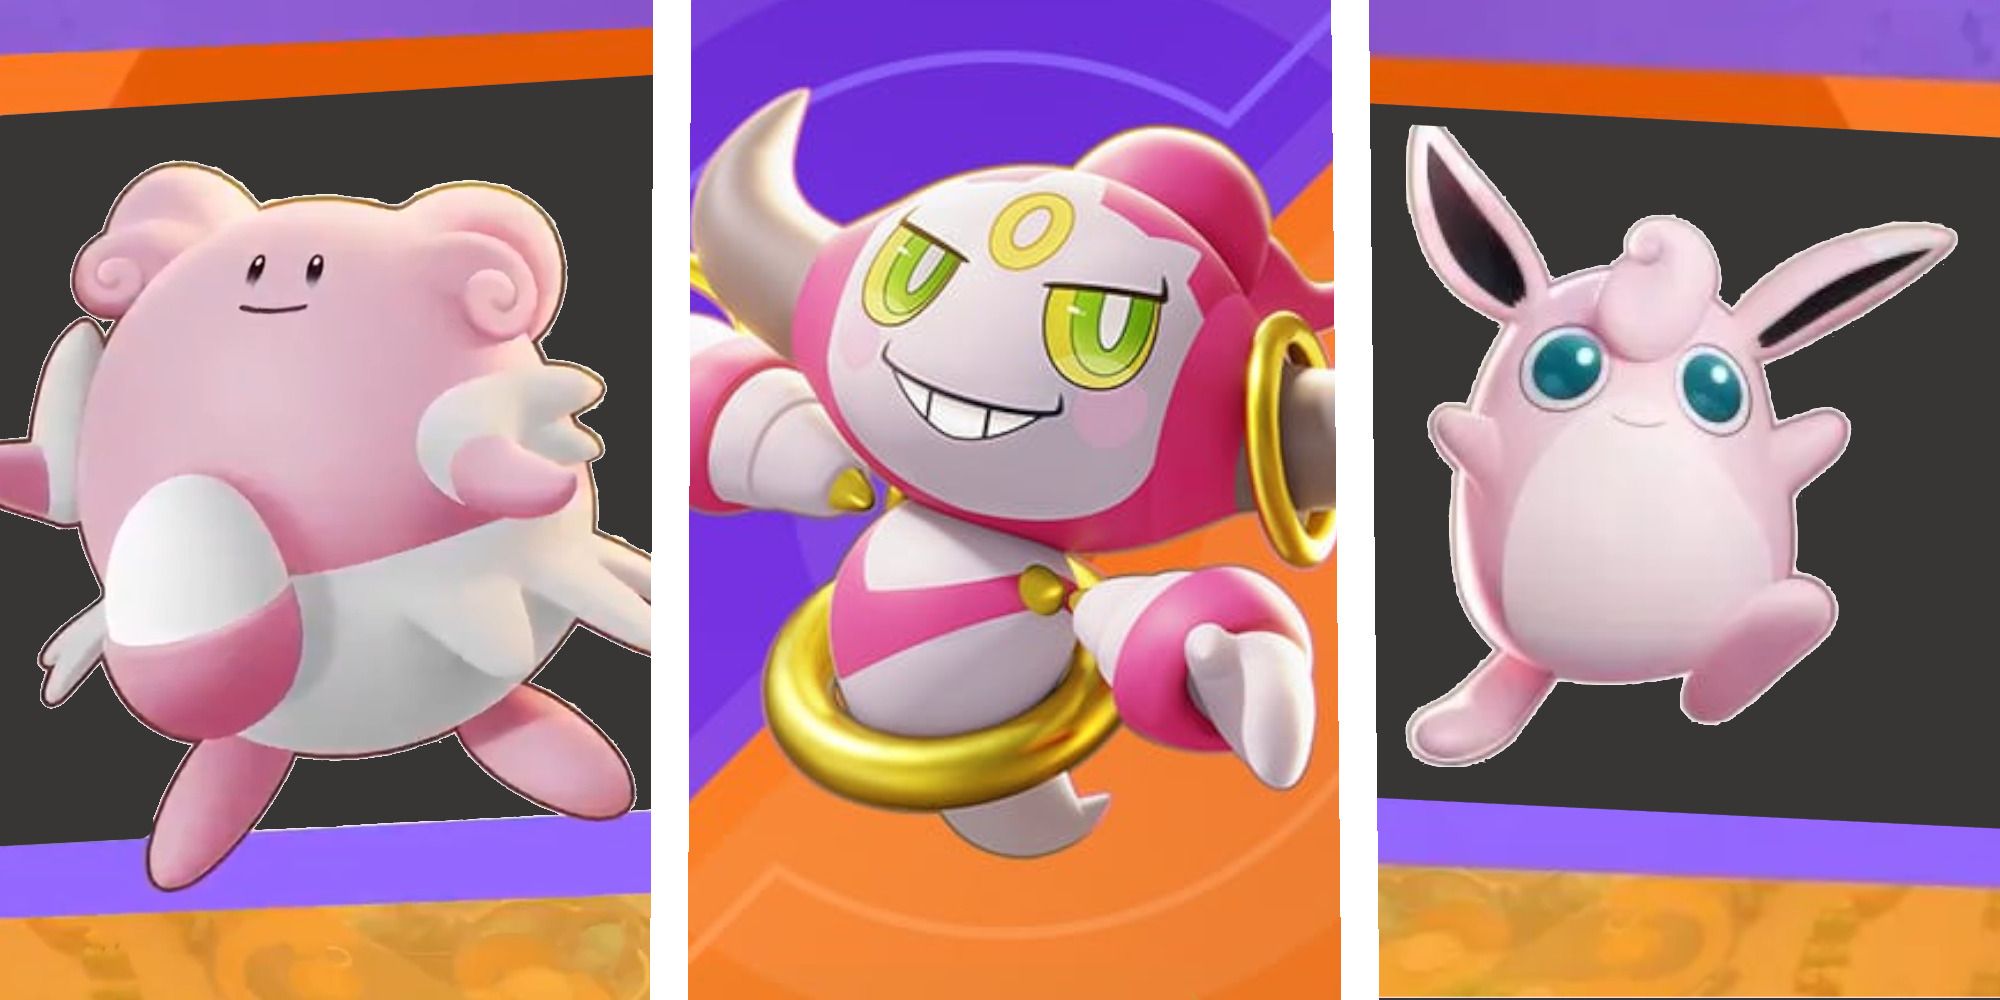 Best Support Items For Pokemon Unite Feature Image Featuring Hoopa, Blissy, And Wigglytuff